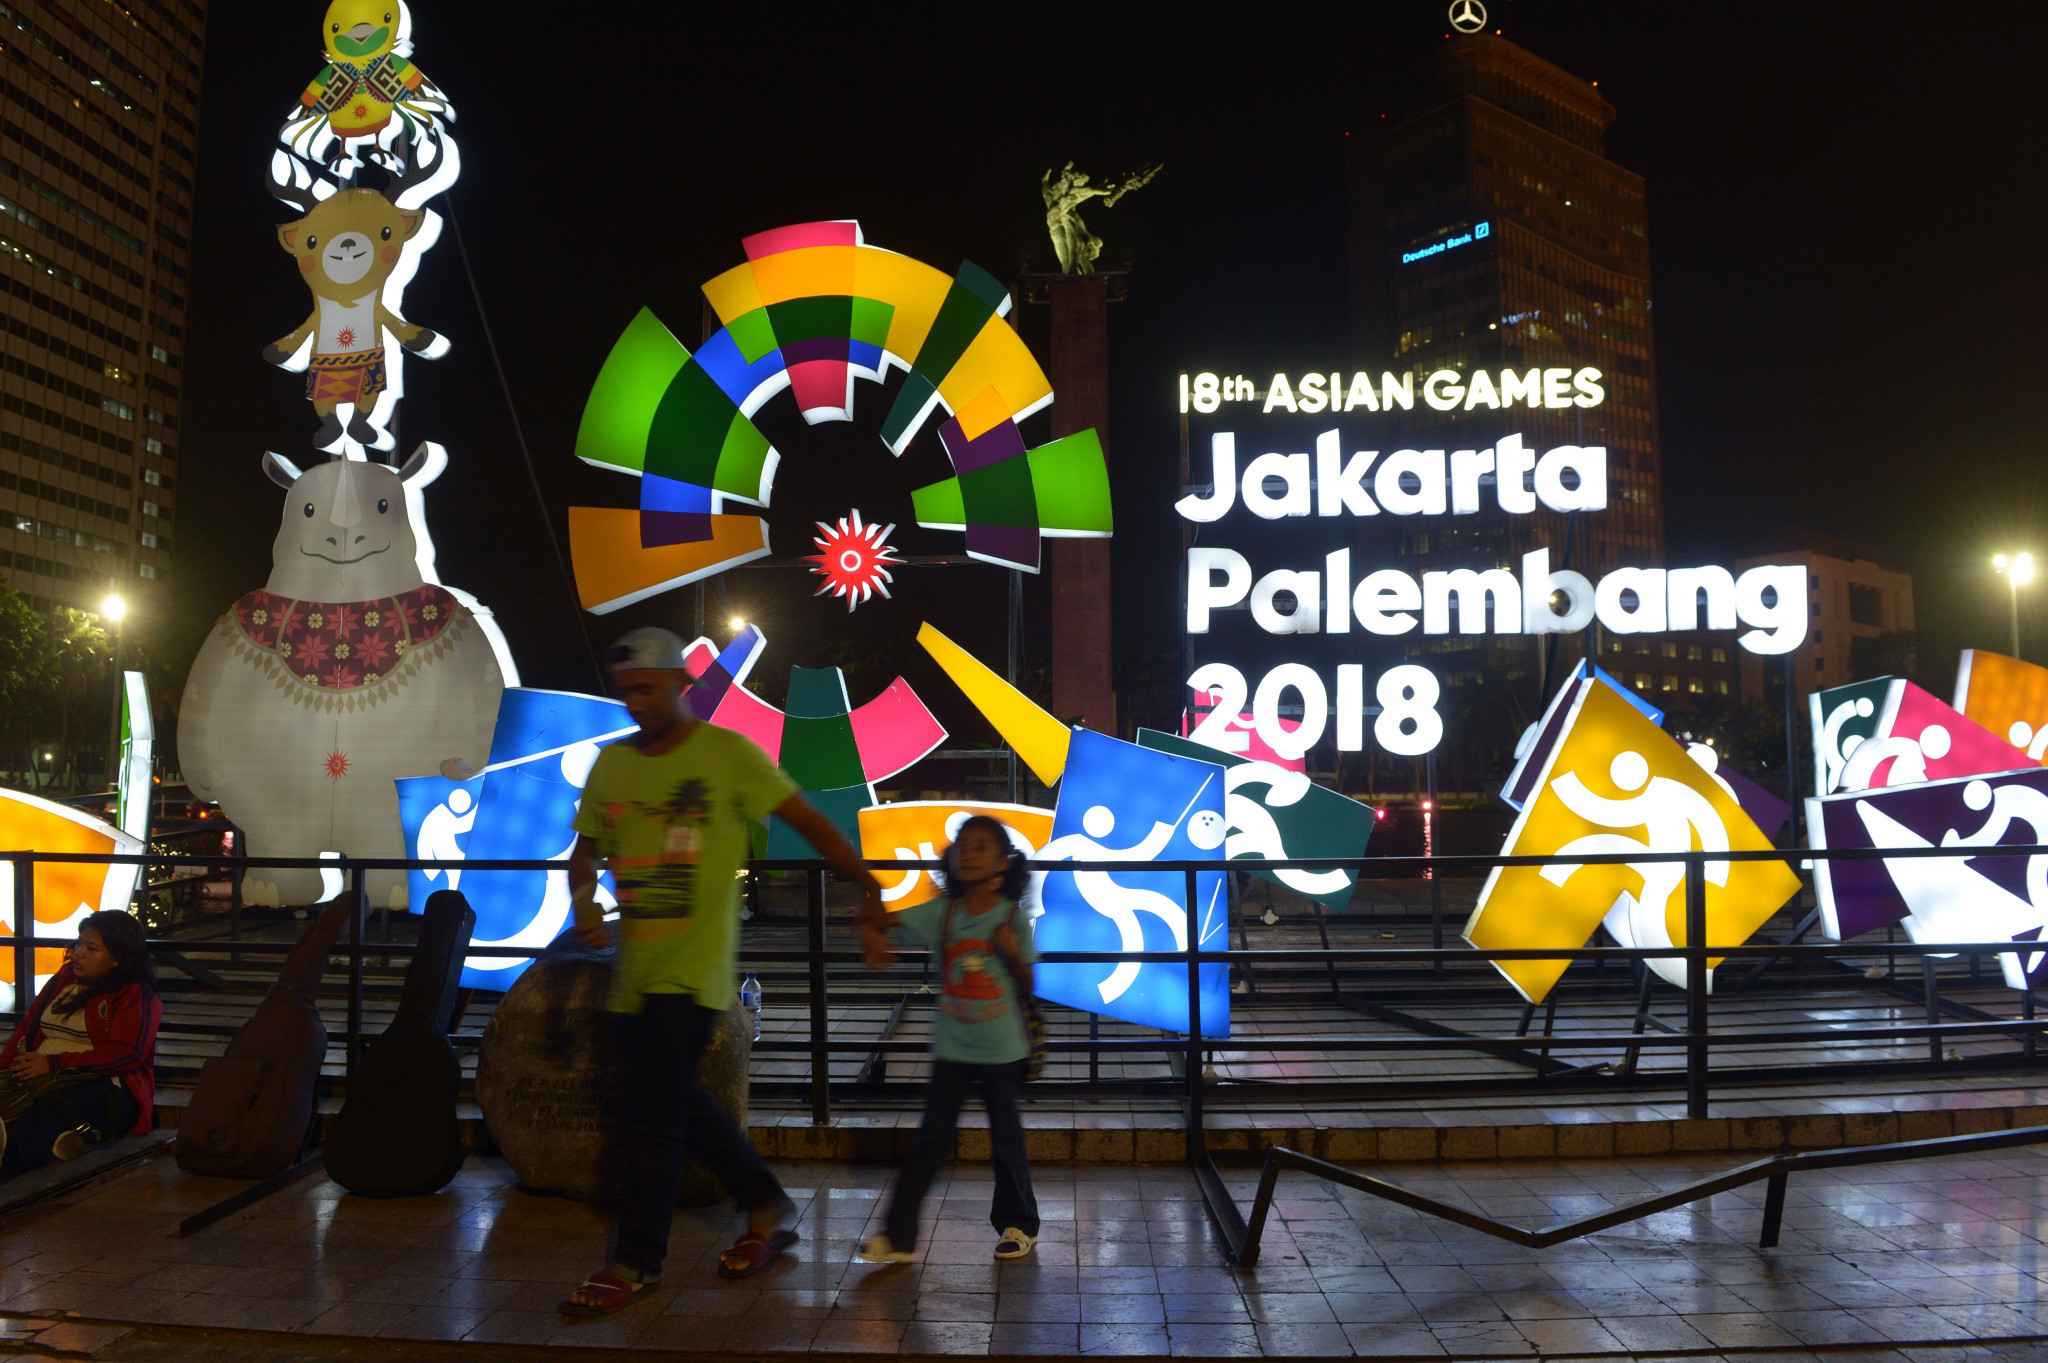 The 2018 Asian Games are set to take place in Jakarta and Palembang from August 18 to September 2 ©Getty Images